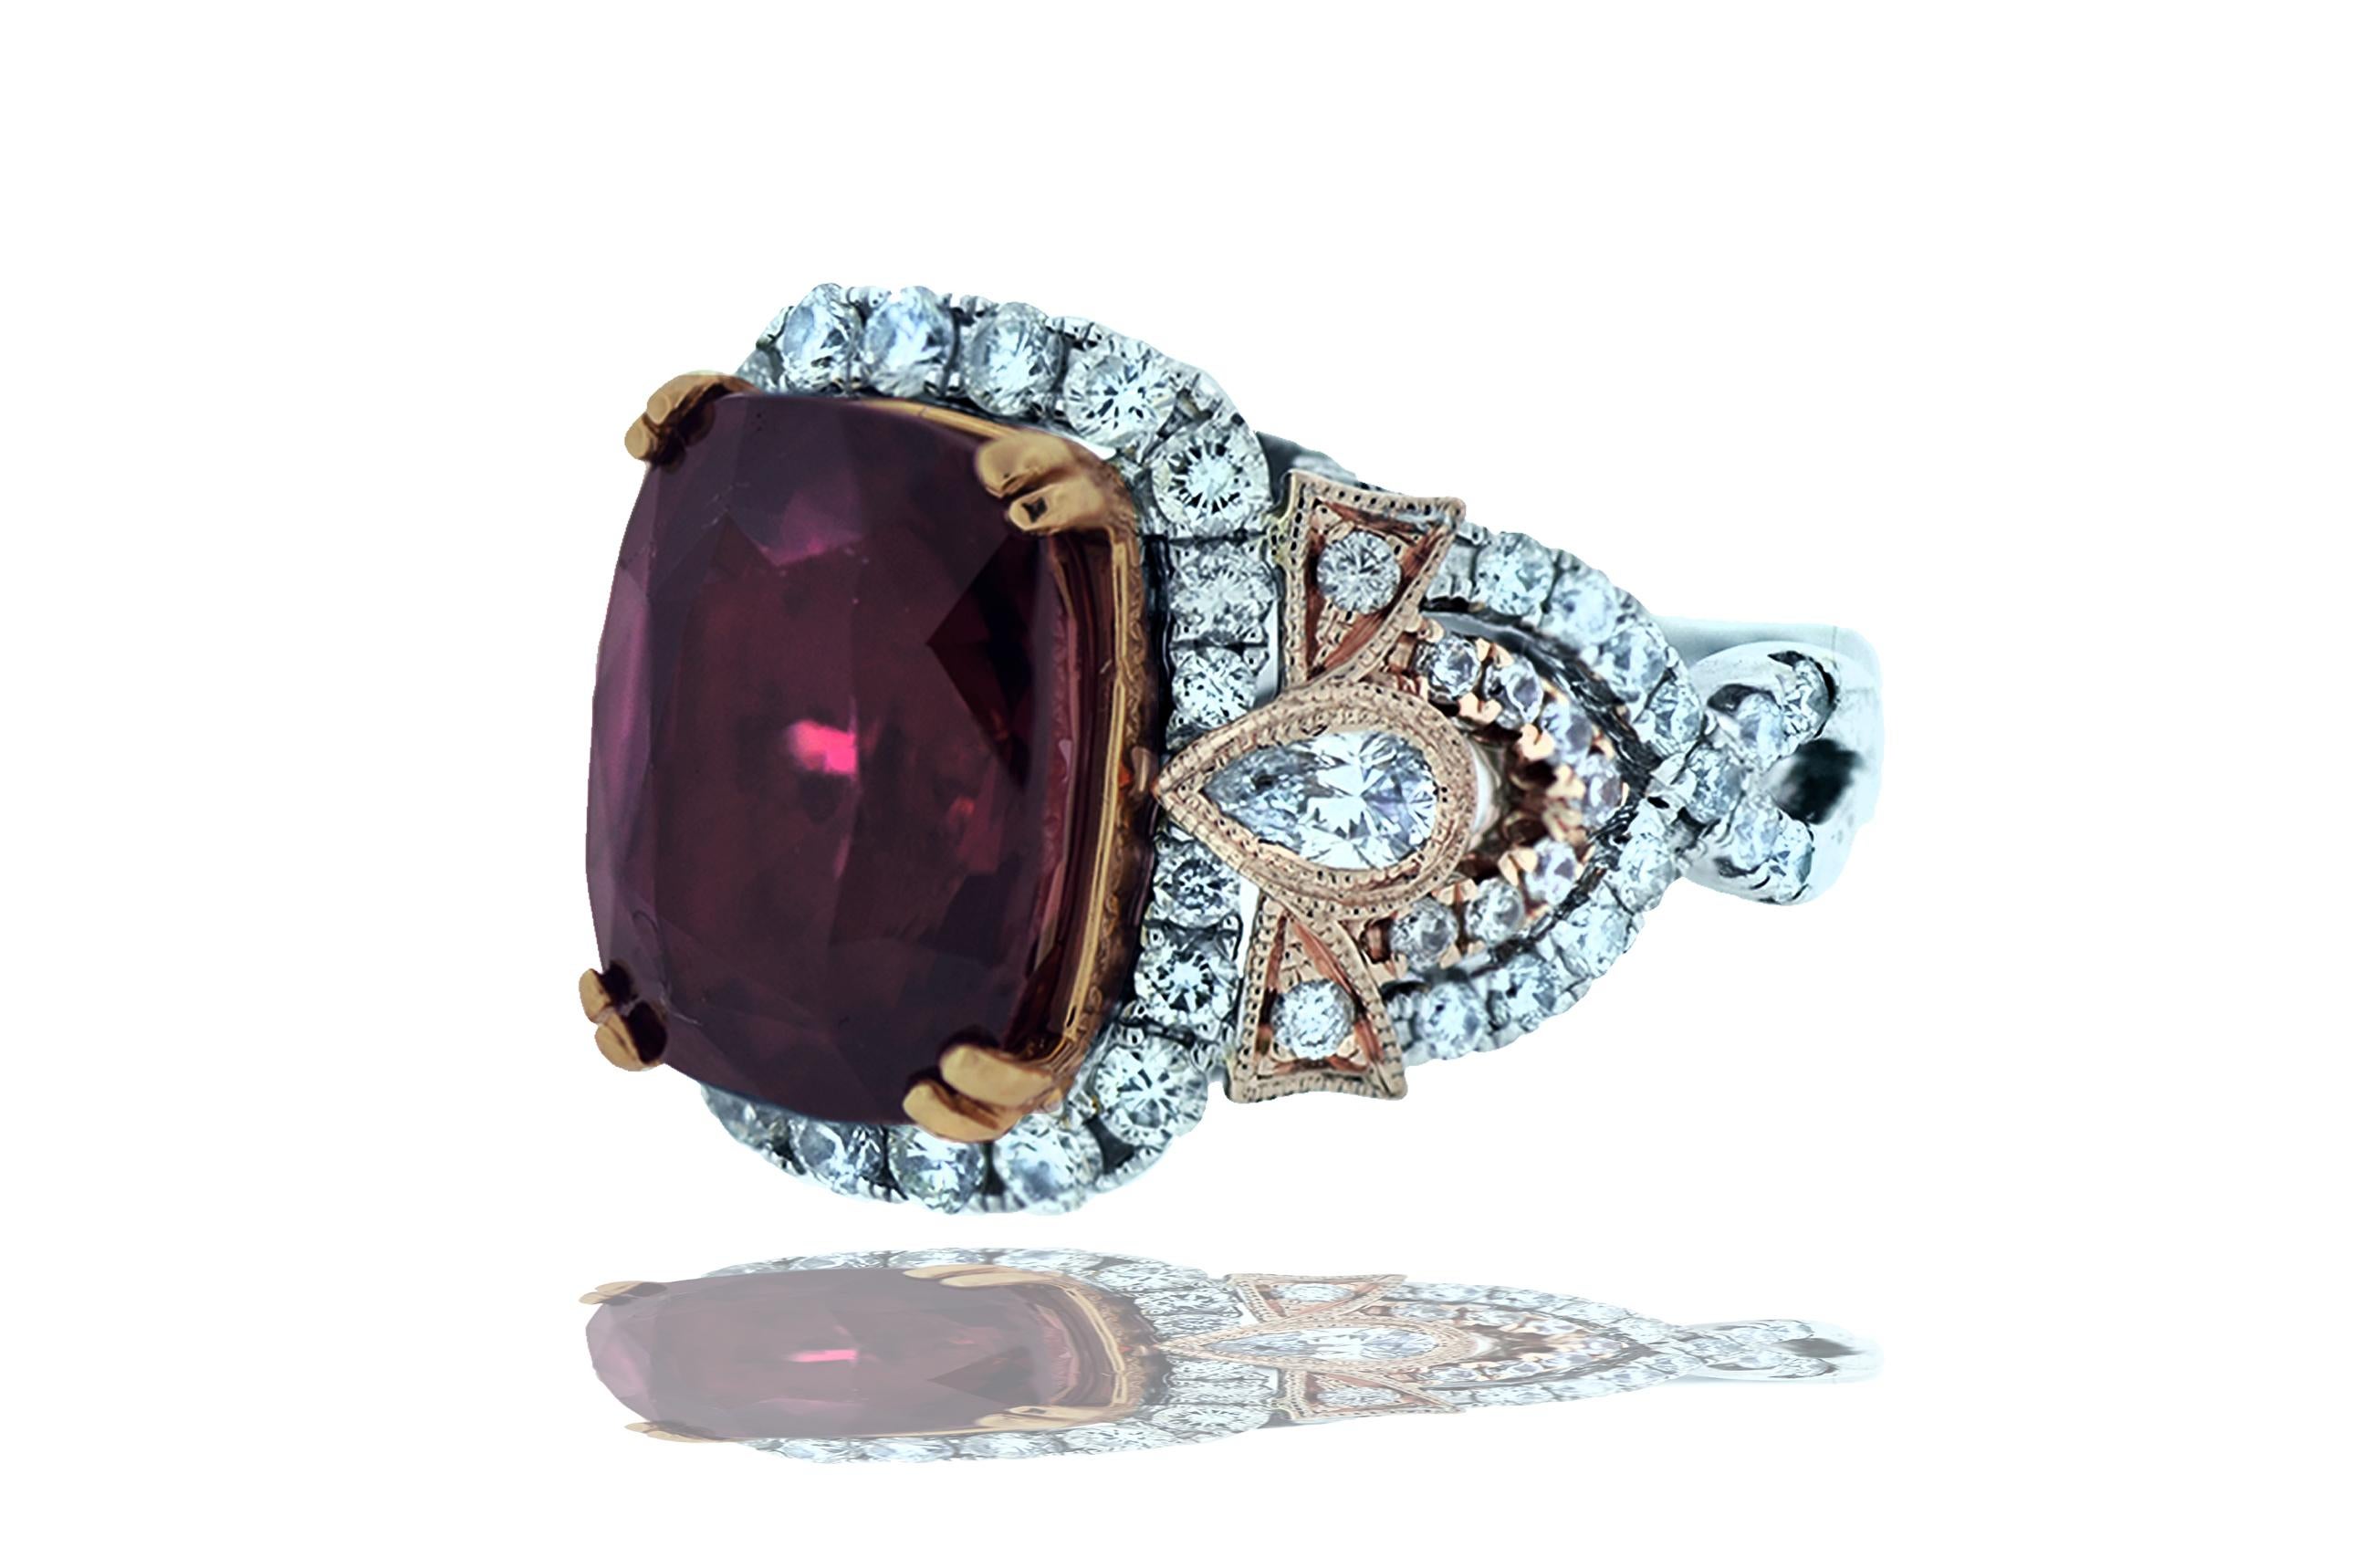 A beautiful hue rarely seen, this stunning mauve burgundy color can be seen in this impressive 10 carat cushion cut Spinel.  This center stone is accented by .50 carats of white F-G VS round brilliant diamonds set in a bright cut style.  The